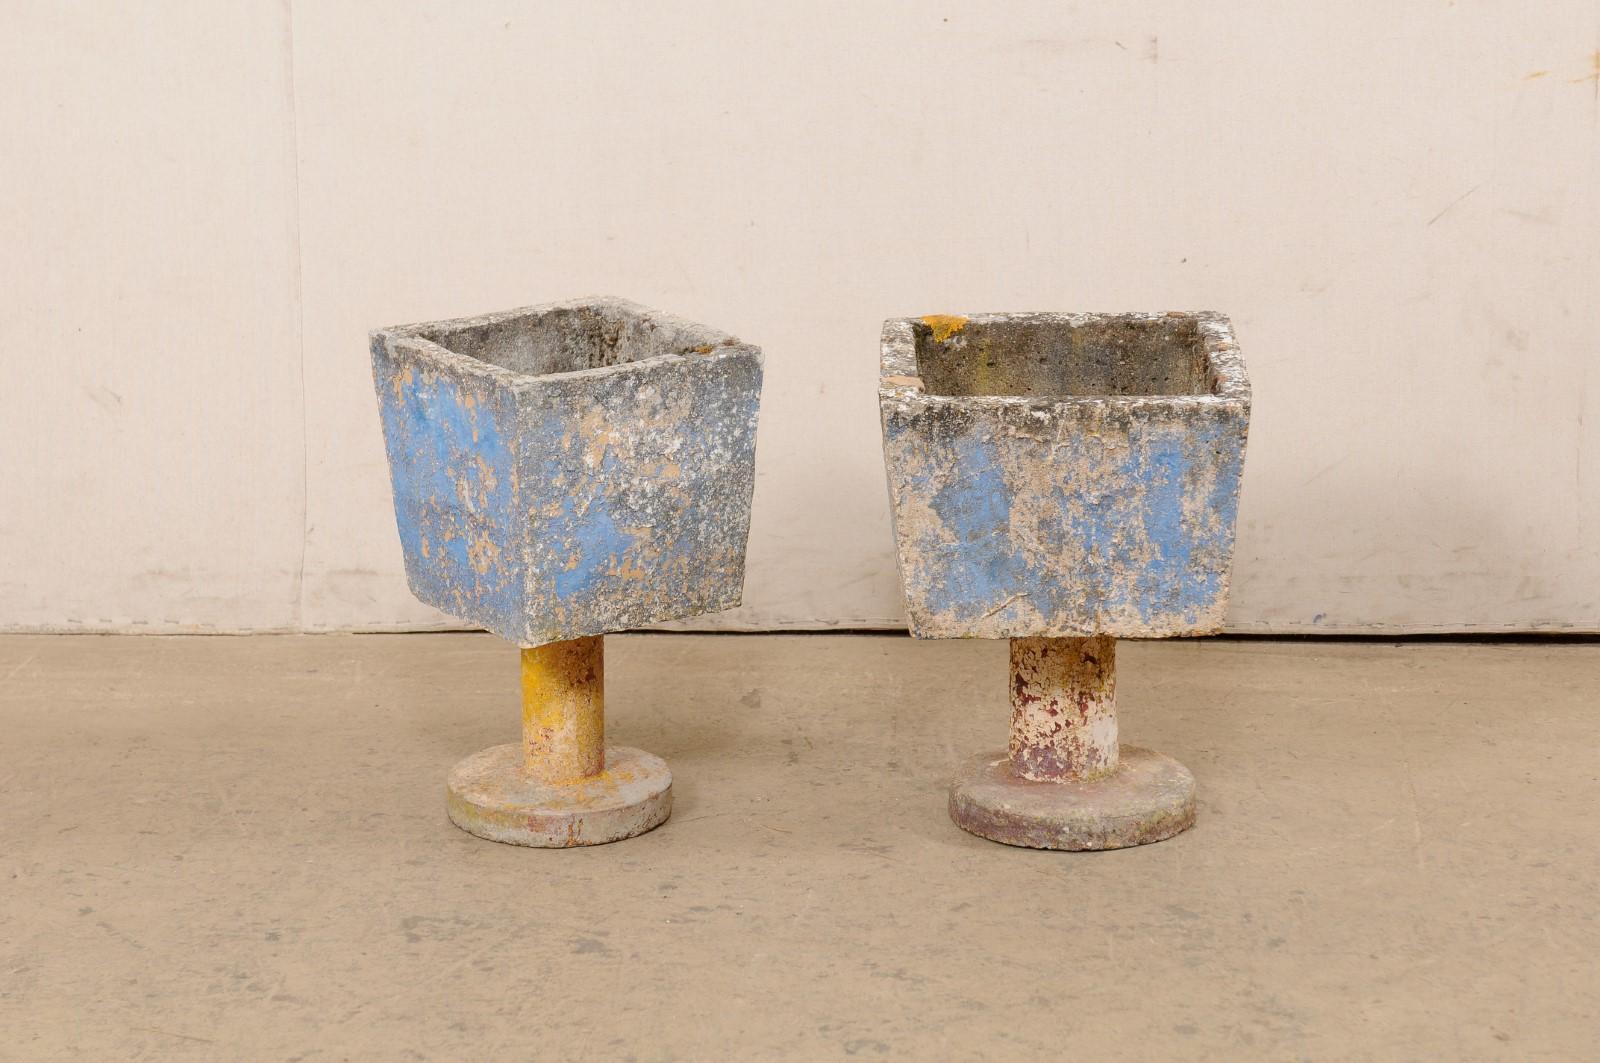 A Spanish near-pair of cast-stone planters, with their original paint, from the mid-20th century. These playful garden planters from Spain have square-shape bodies which are raised on cylindrical pedestals, and supported on a round platform base.